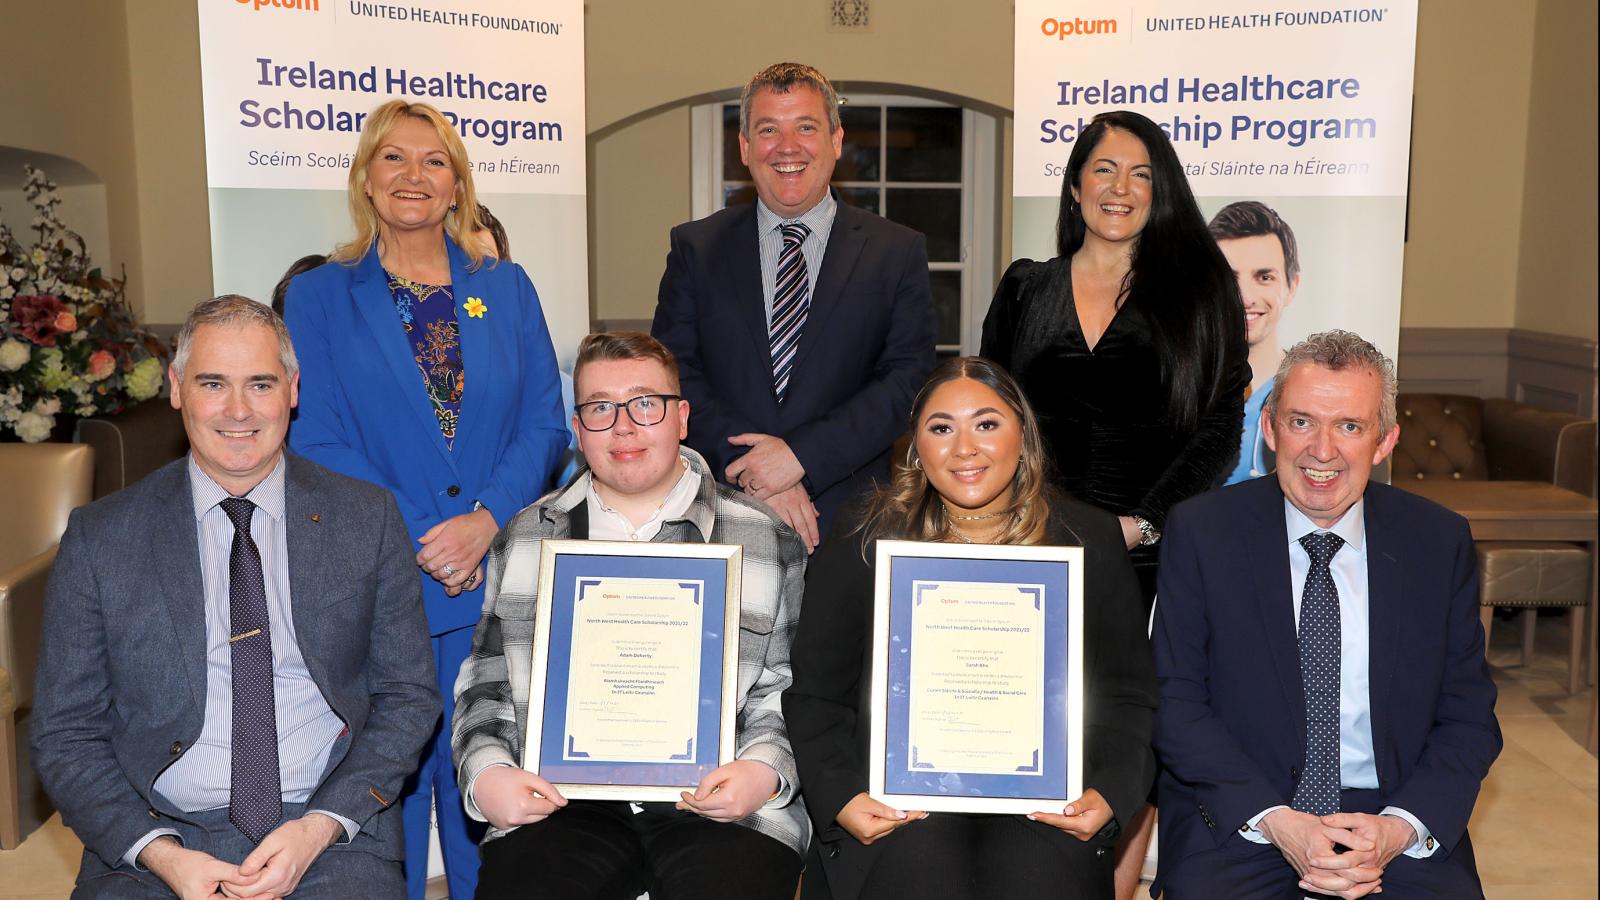 ATU Donegal healthcare scholarships